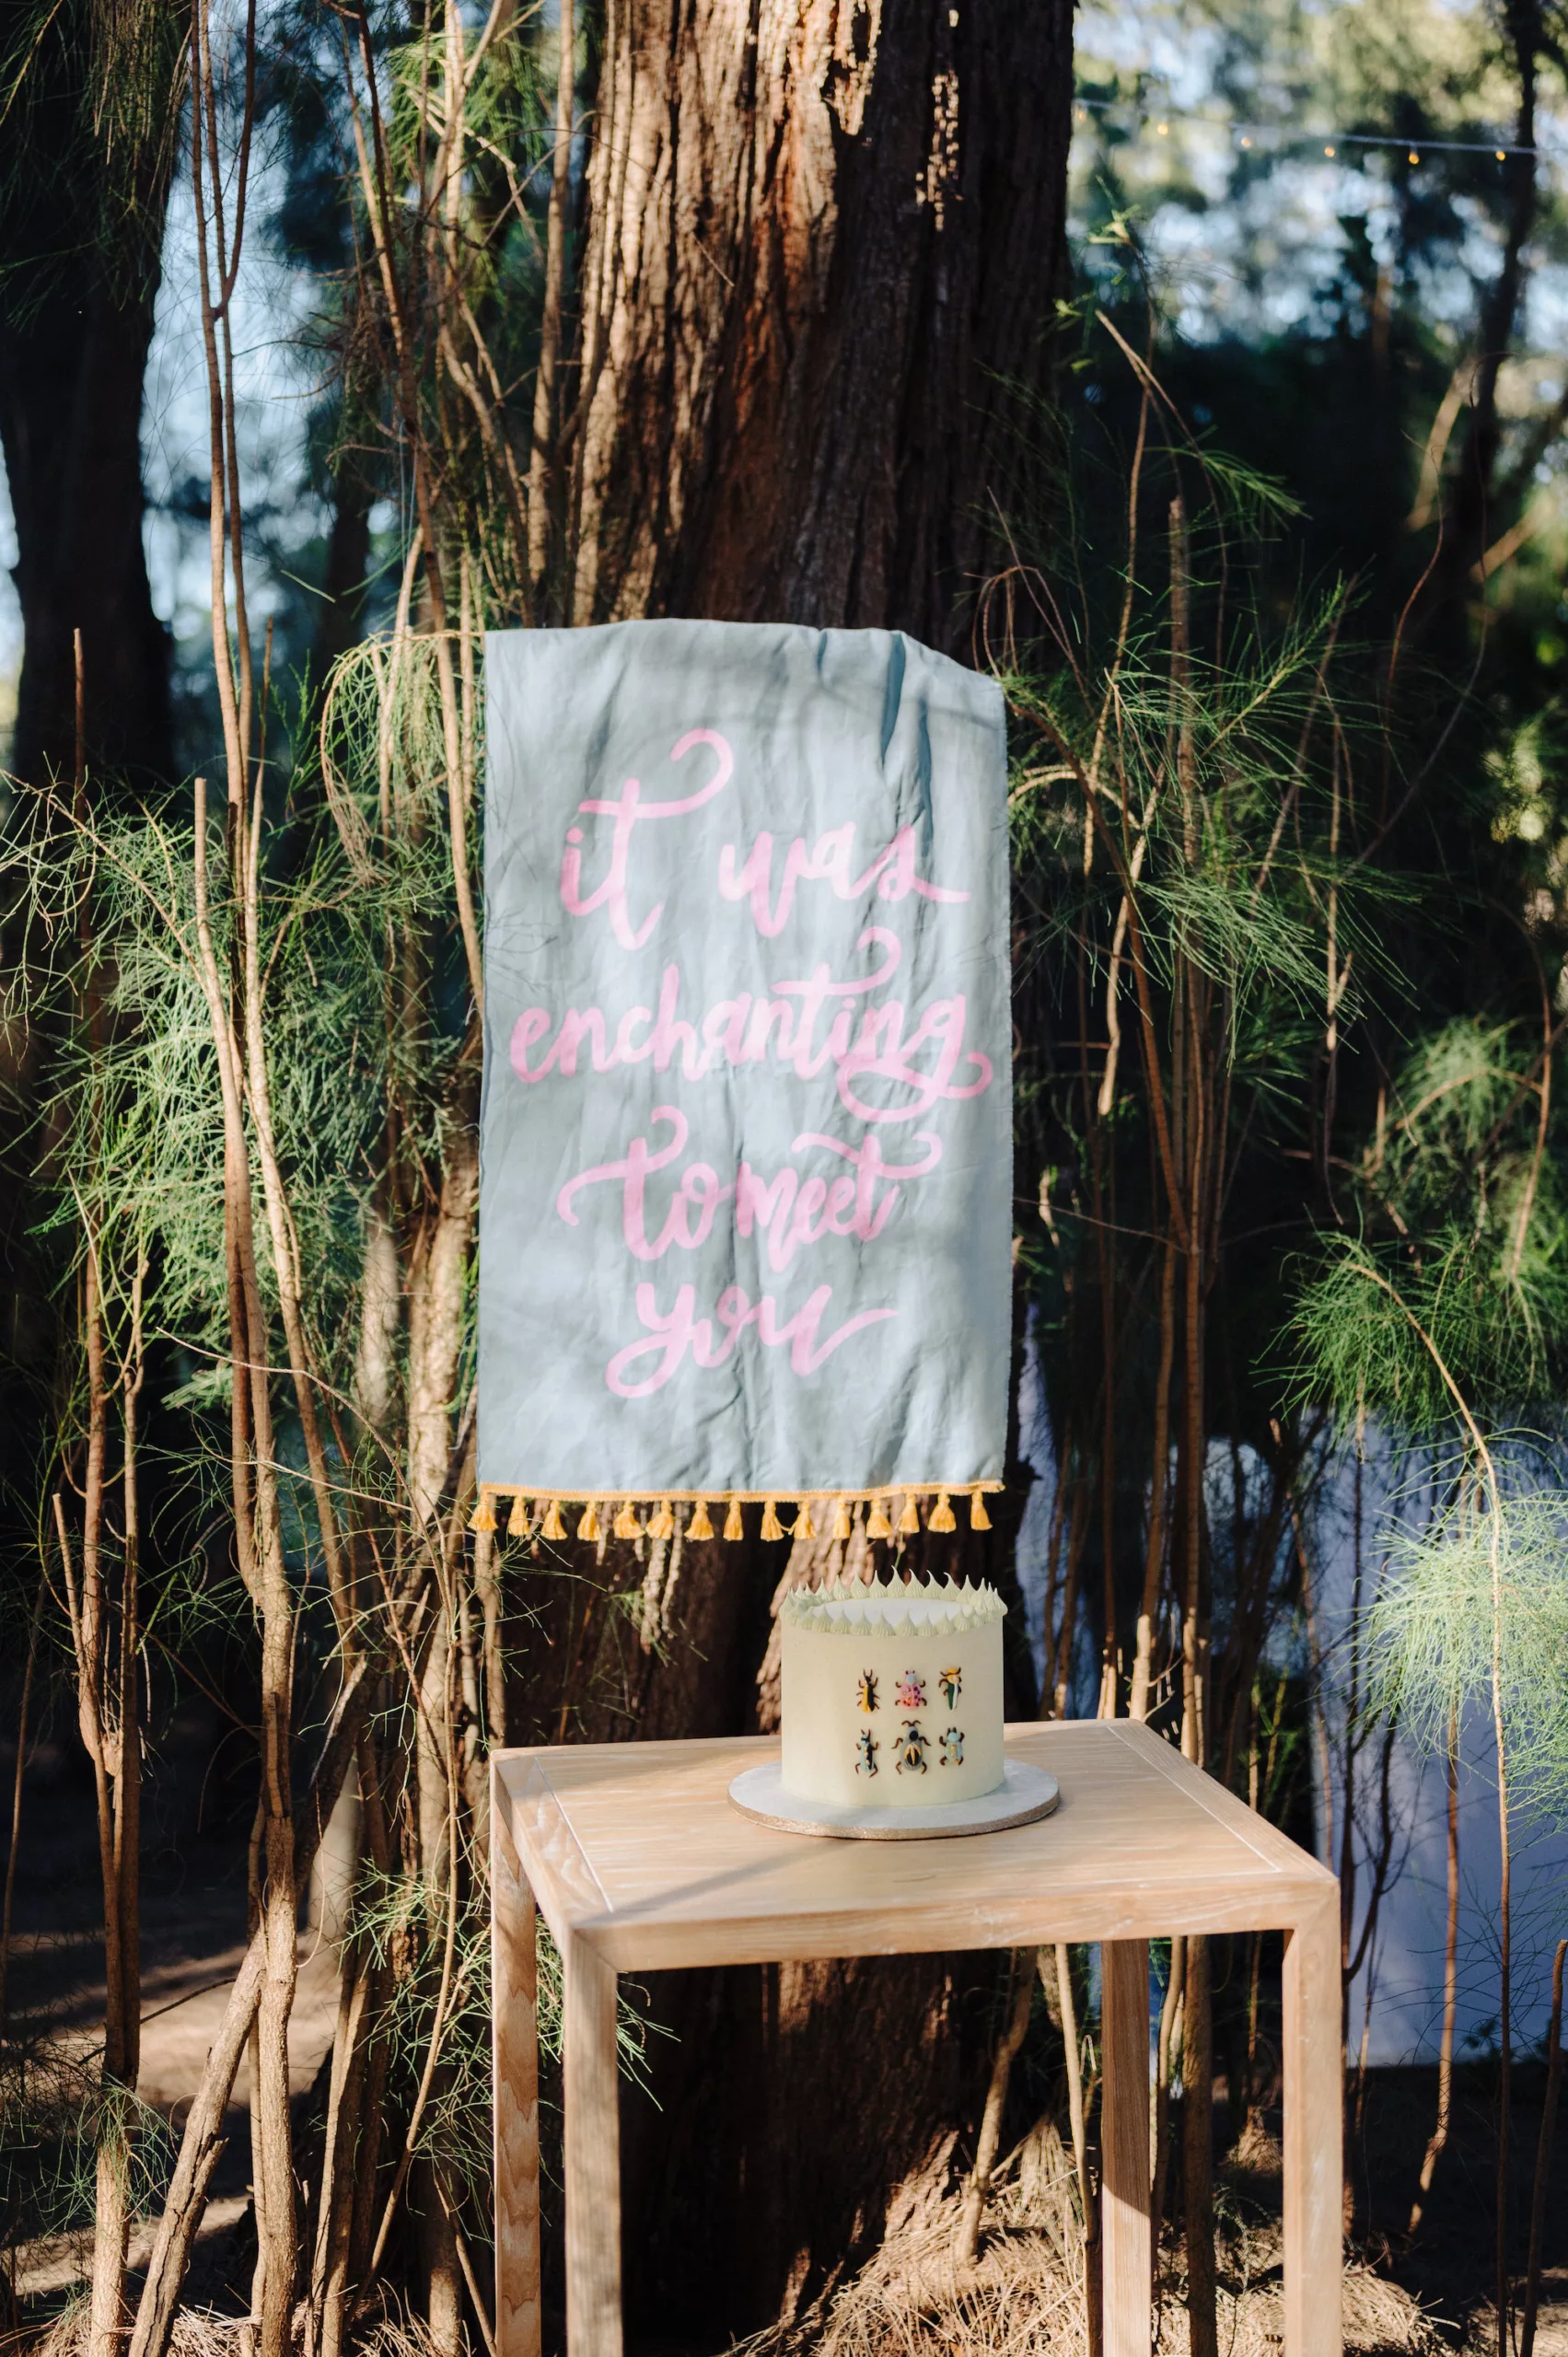 It Was Enchanting to Meet You Taylor Swift Whimsical Wedding Sign Decor Ideas | Single-Tiered Wedding Cake with Bug Accents